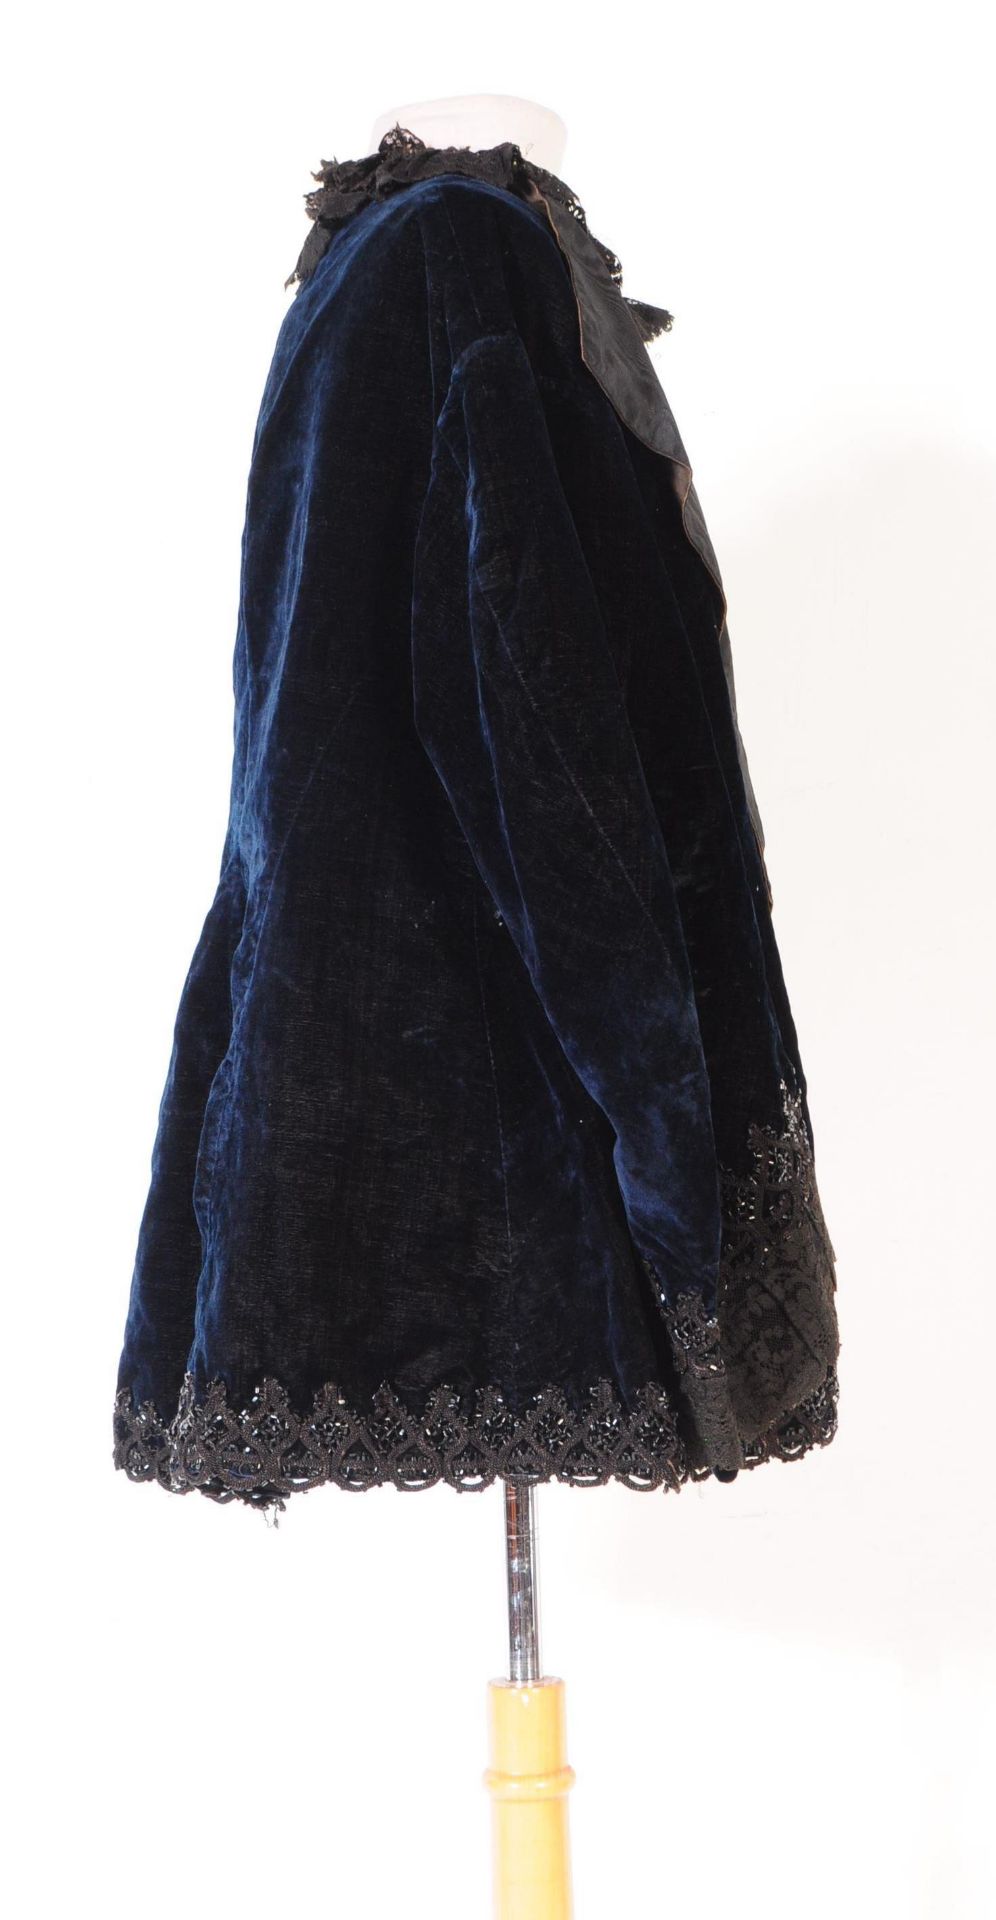 TWO VICTORIAN CLOTHING ITEMS - VELVET CAPE & SHIRT - Image 3 of 12